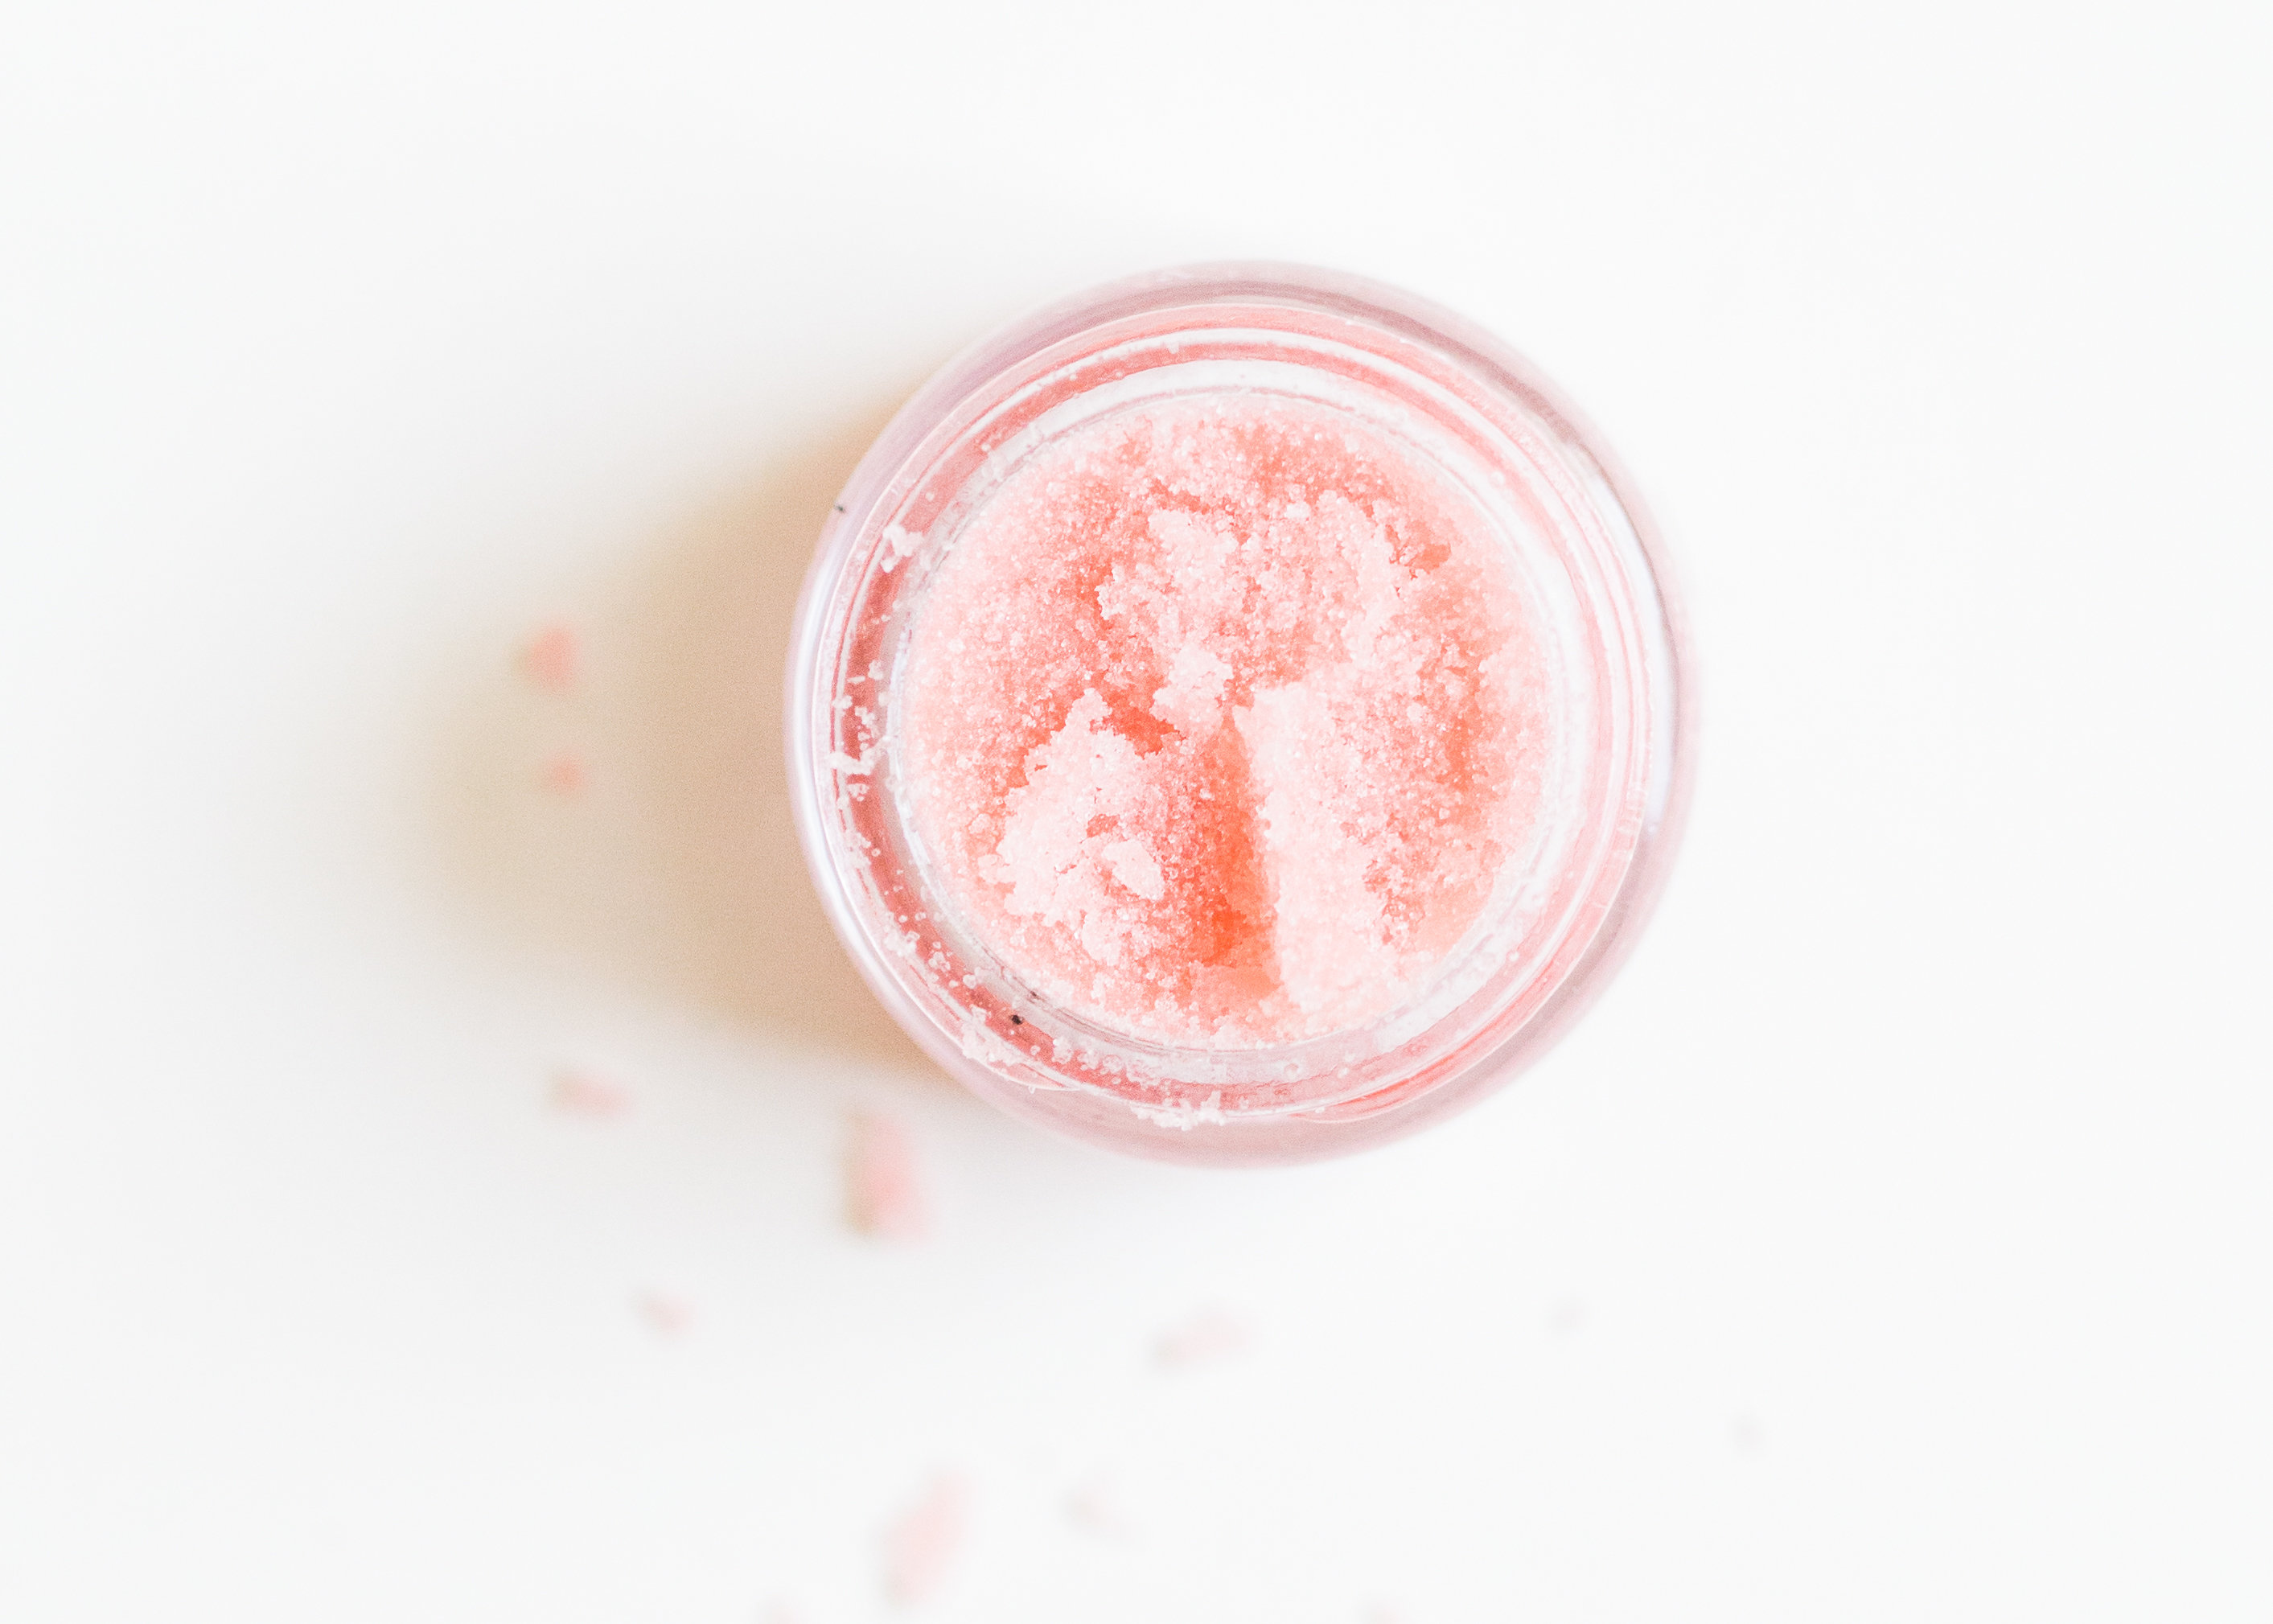 Did you know exfoliating your lips is super important for maintaining healthy, smooth, rosy lips? Make your own easy DIY glittering lip scrub using things you already have in your kitchen, for perfectly polished pout in every season. 